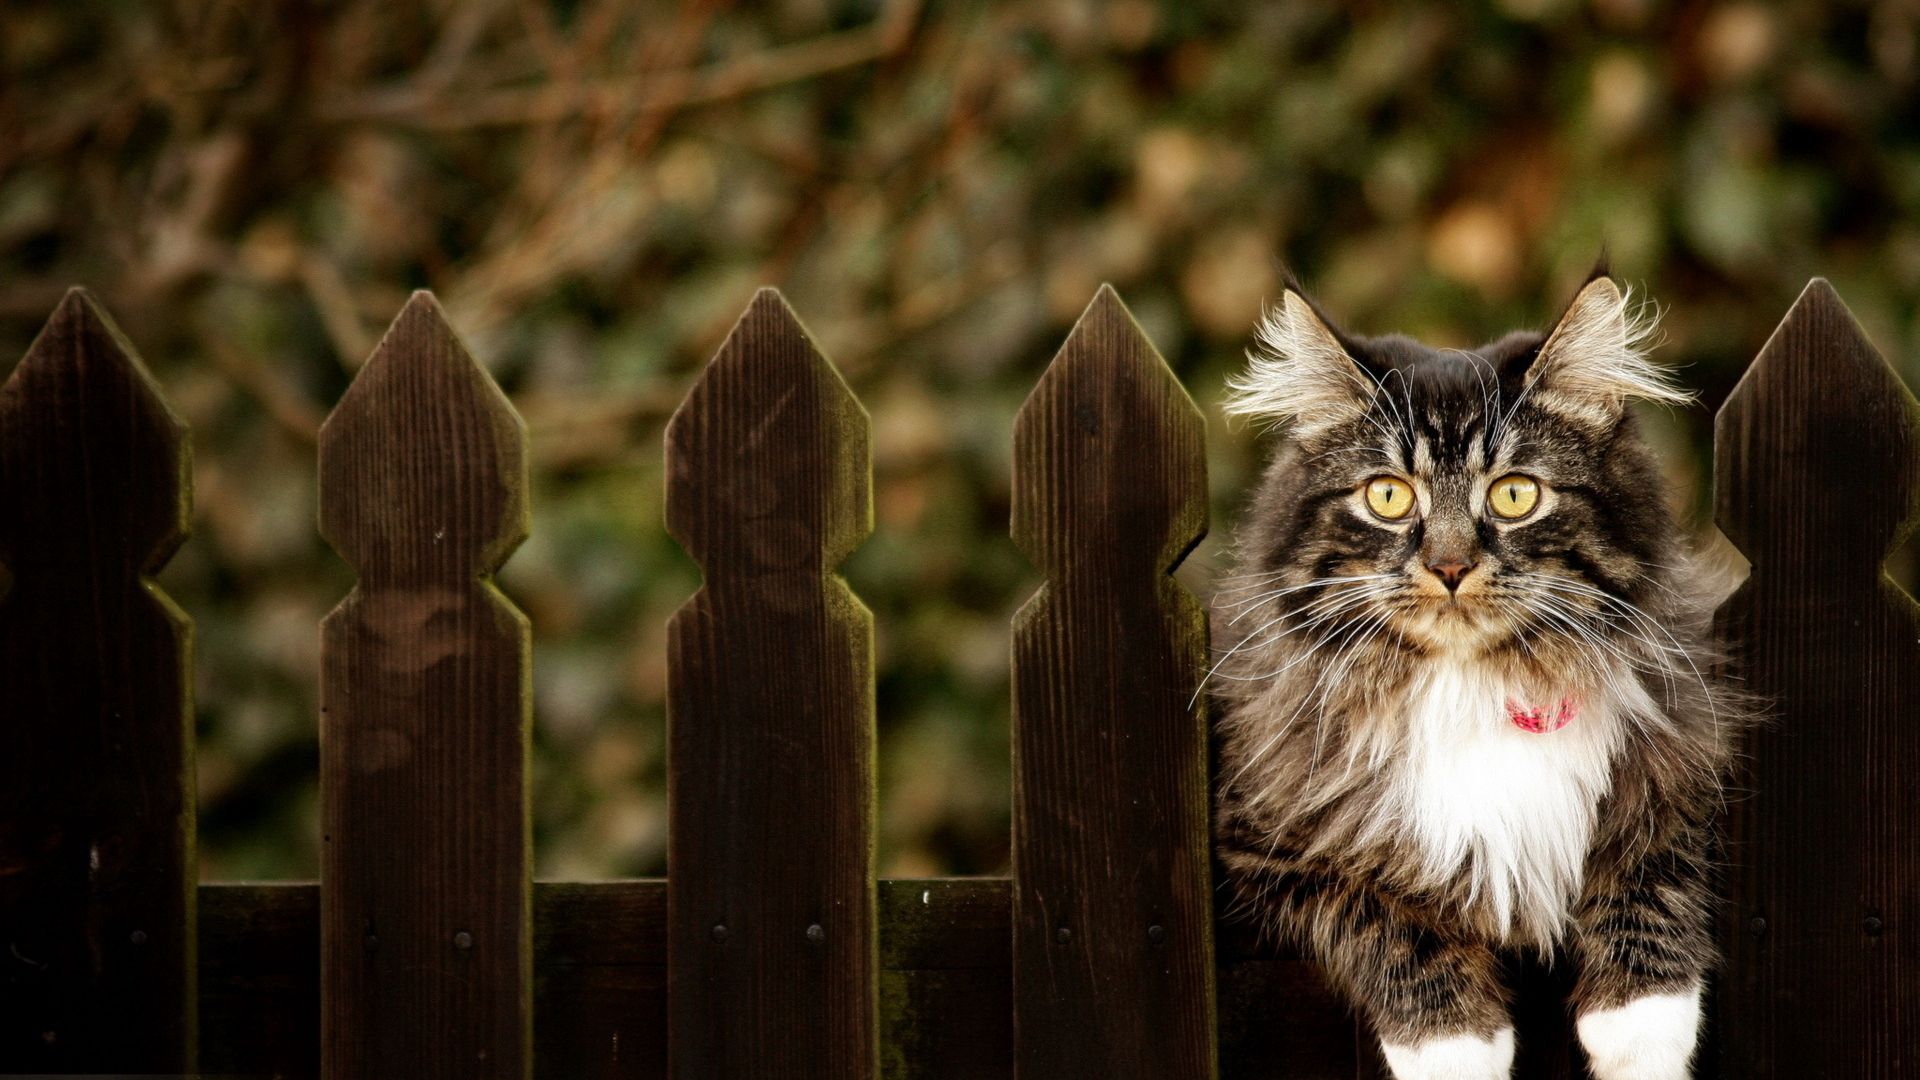 Download wallpaper 1920x1080 cat, furry, fence sitting, dog collar full hd, hdtv, fhd, 1080p HD background